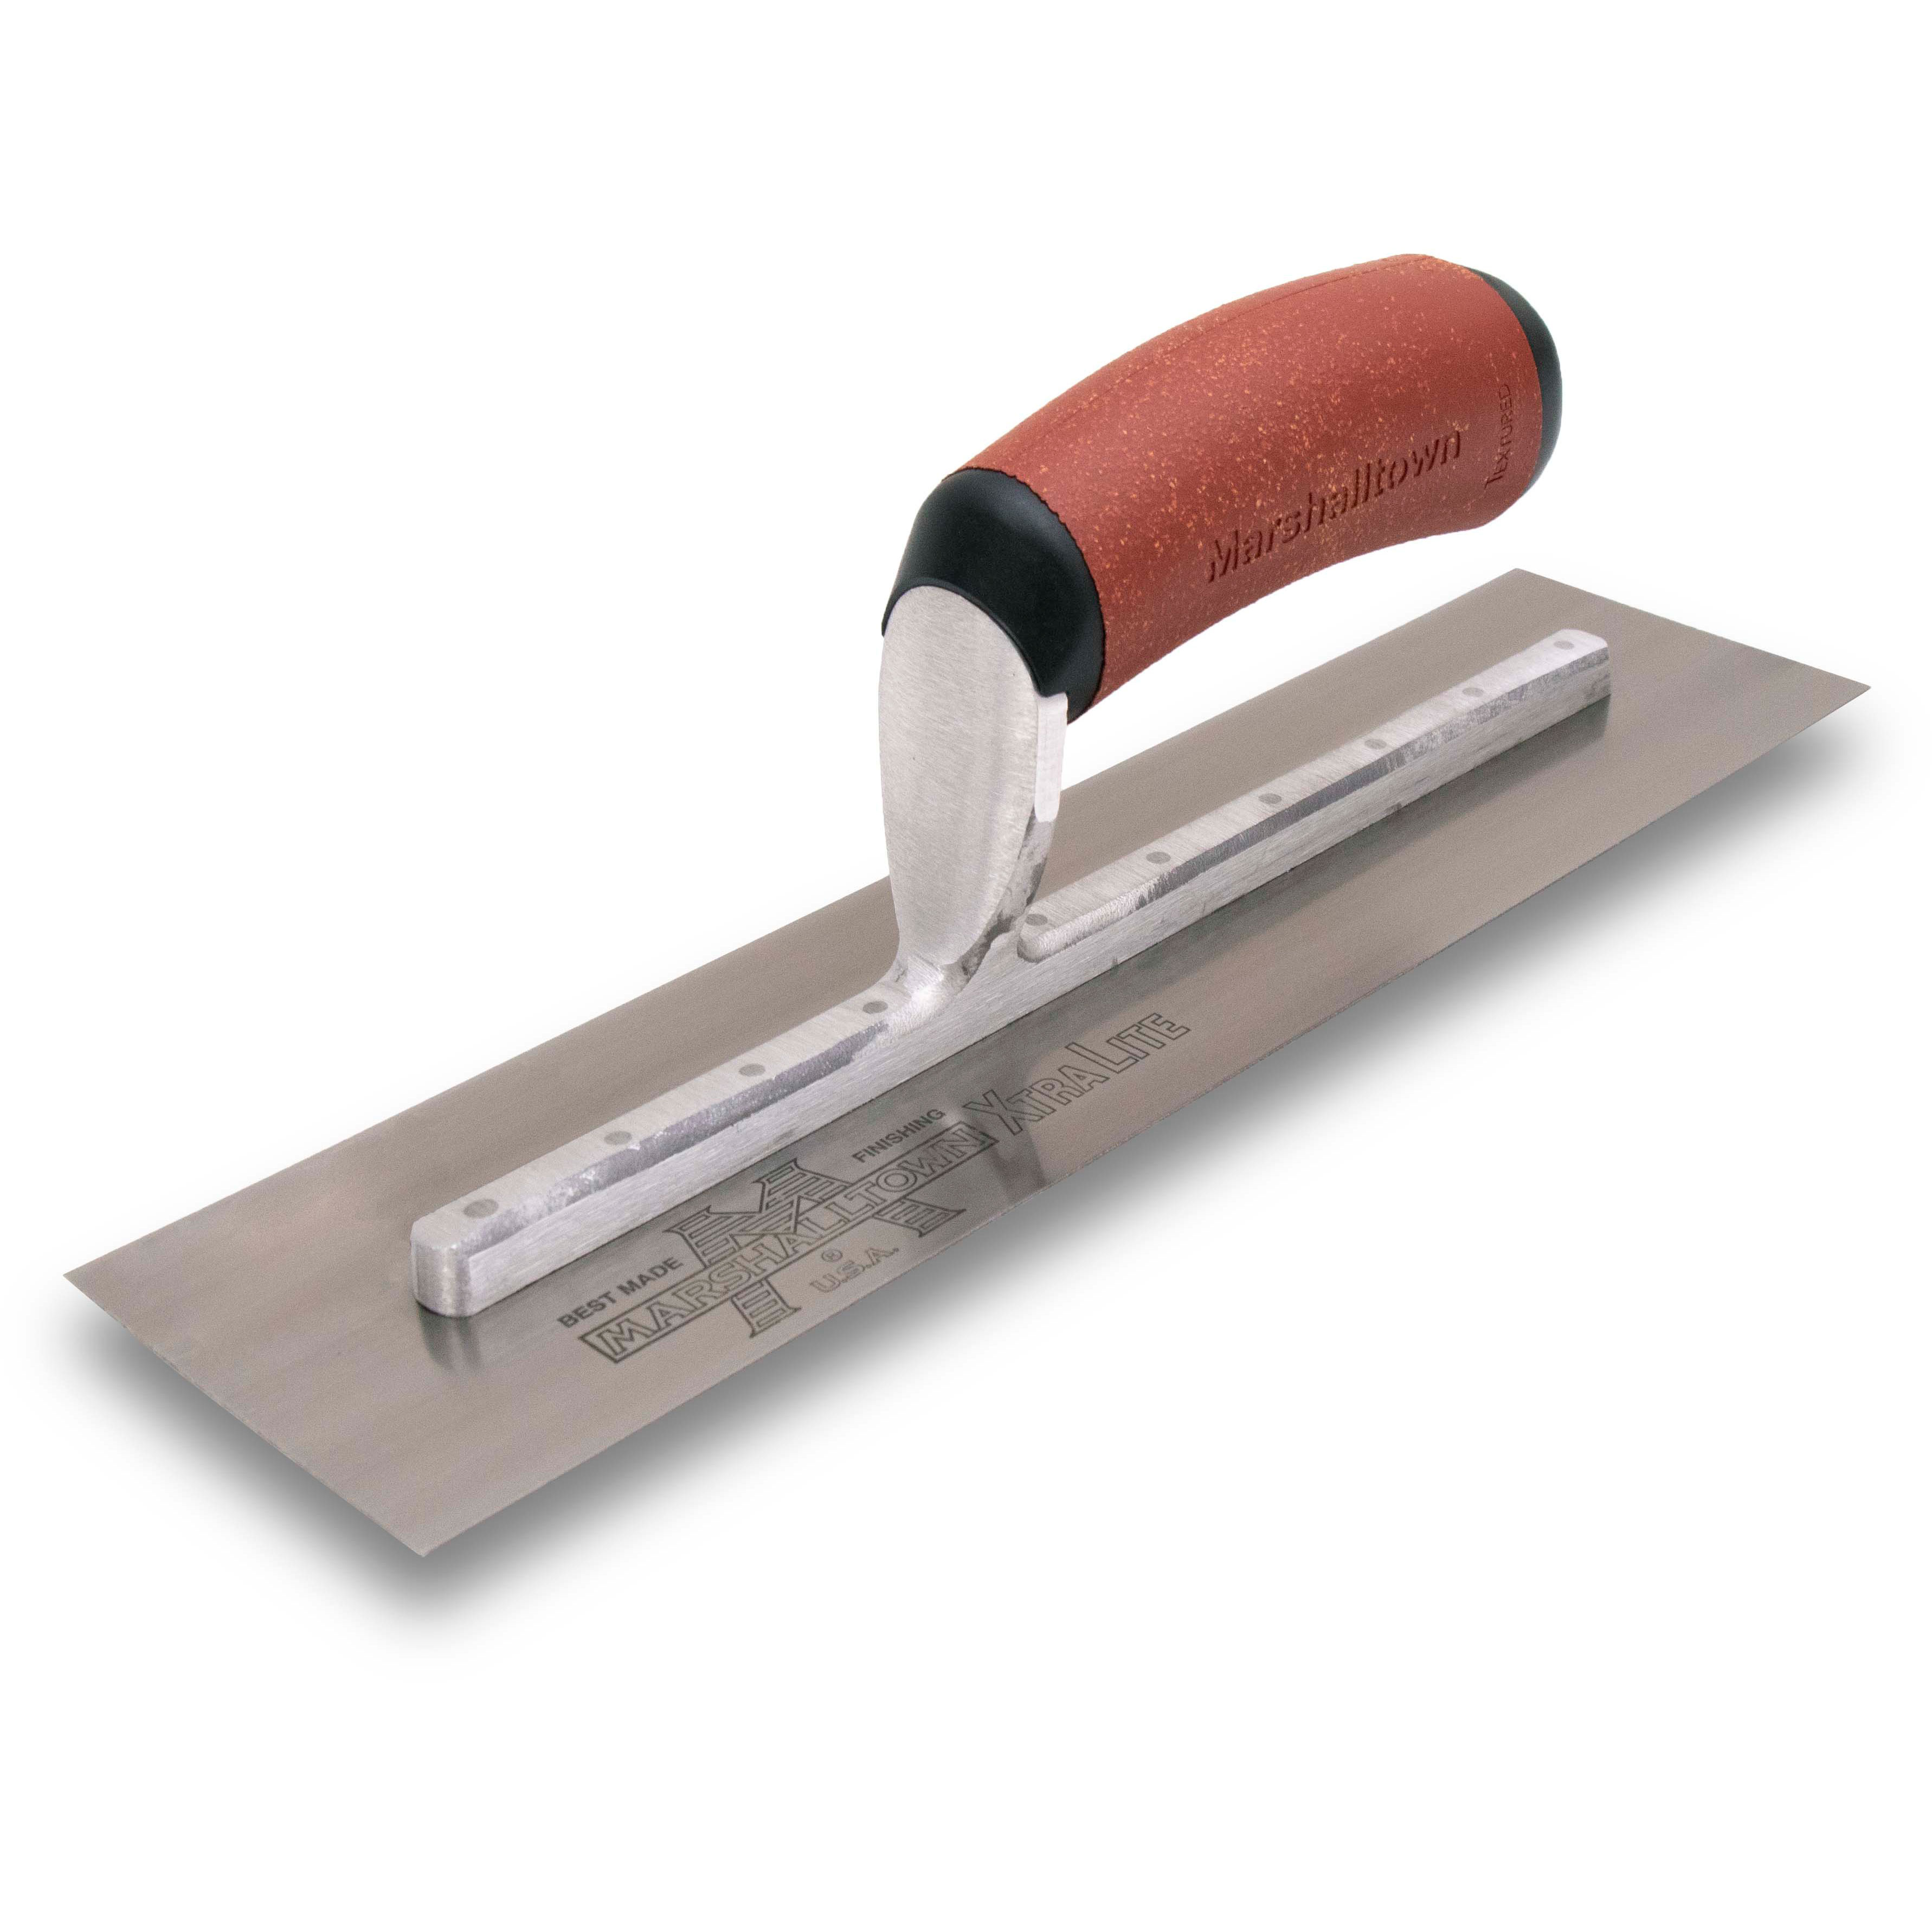 Marshalltown MXS56DC 12in x 3in Finishing Trowel with DuraCork Handle MXS56DC